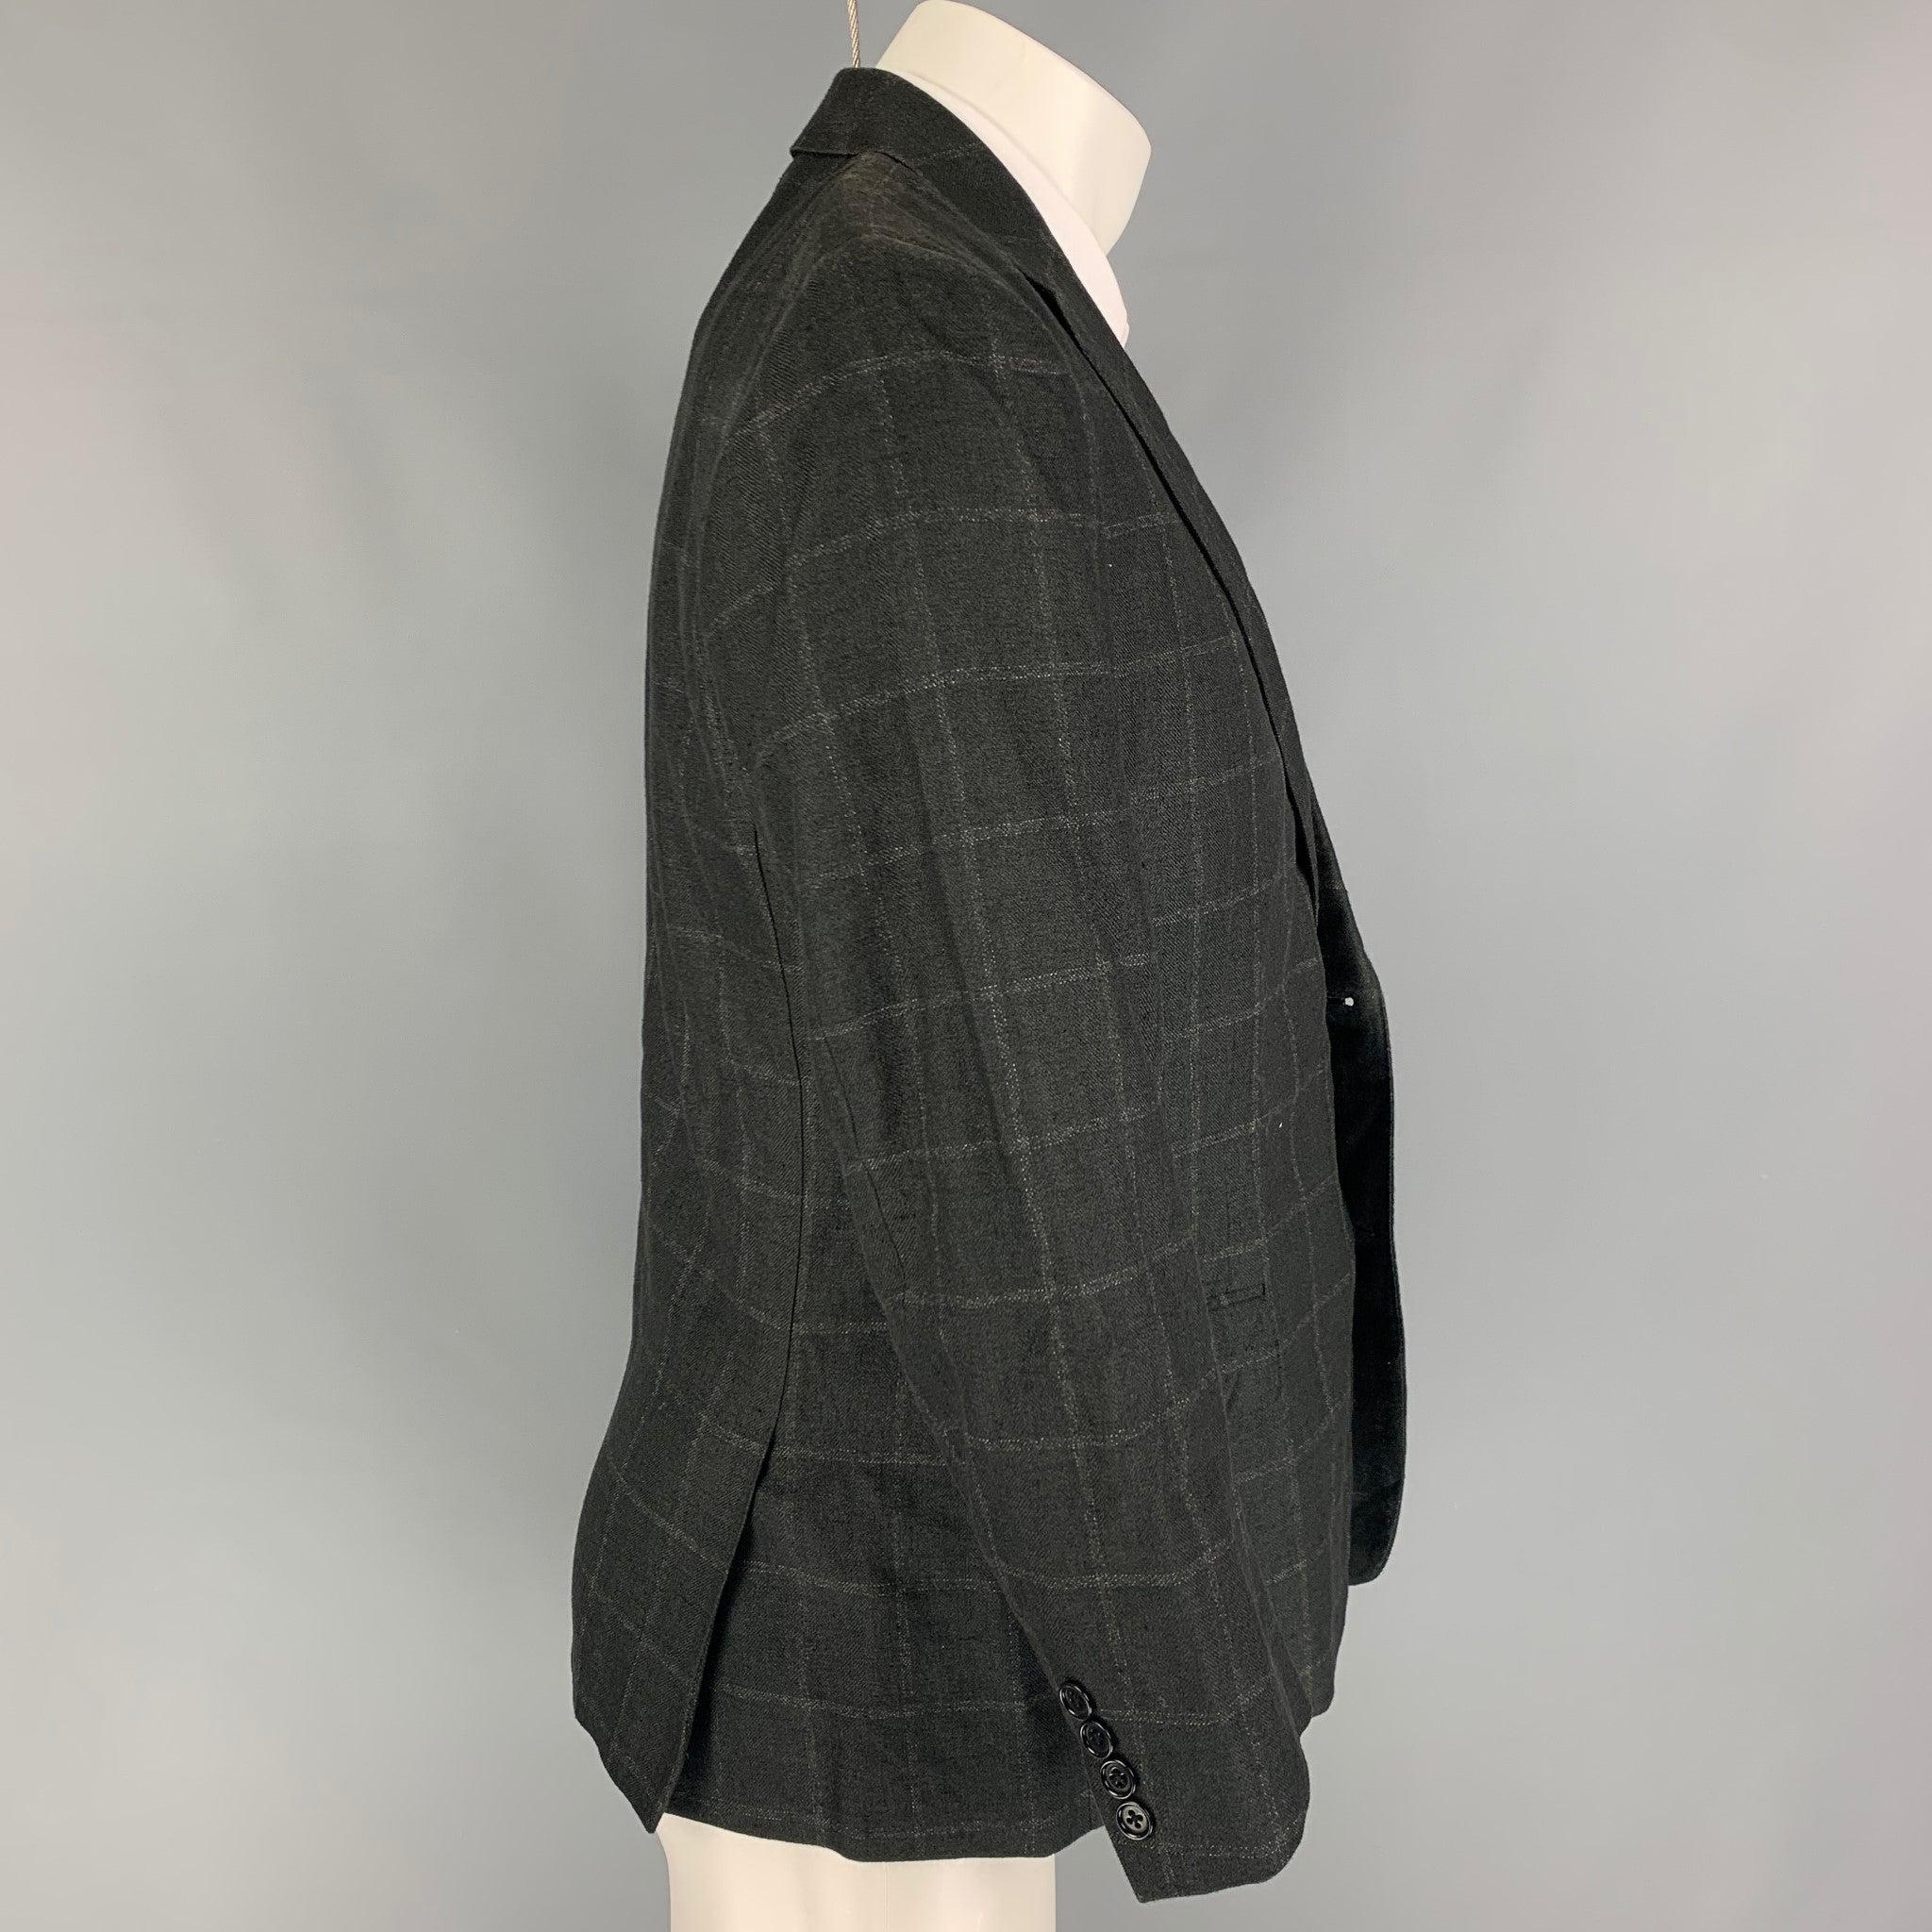 CANALI sport coat comes in a charcoal window pane silk with a full liner featuring a notch lapel, flap pockets, double back vent, and a double button closure. Made in Italy.
Very Good
Pre-Owned Condition. 

Marked:   48 

Measurements: 
 
Shoulder: